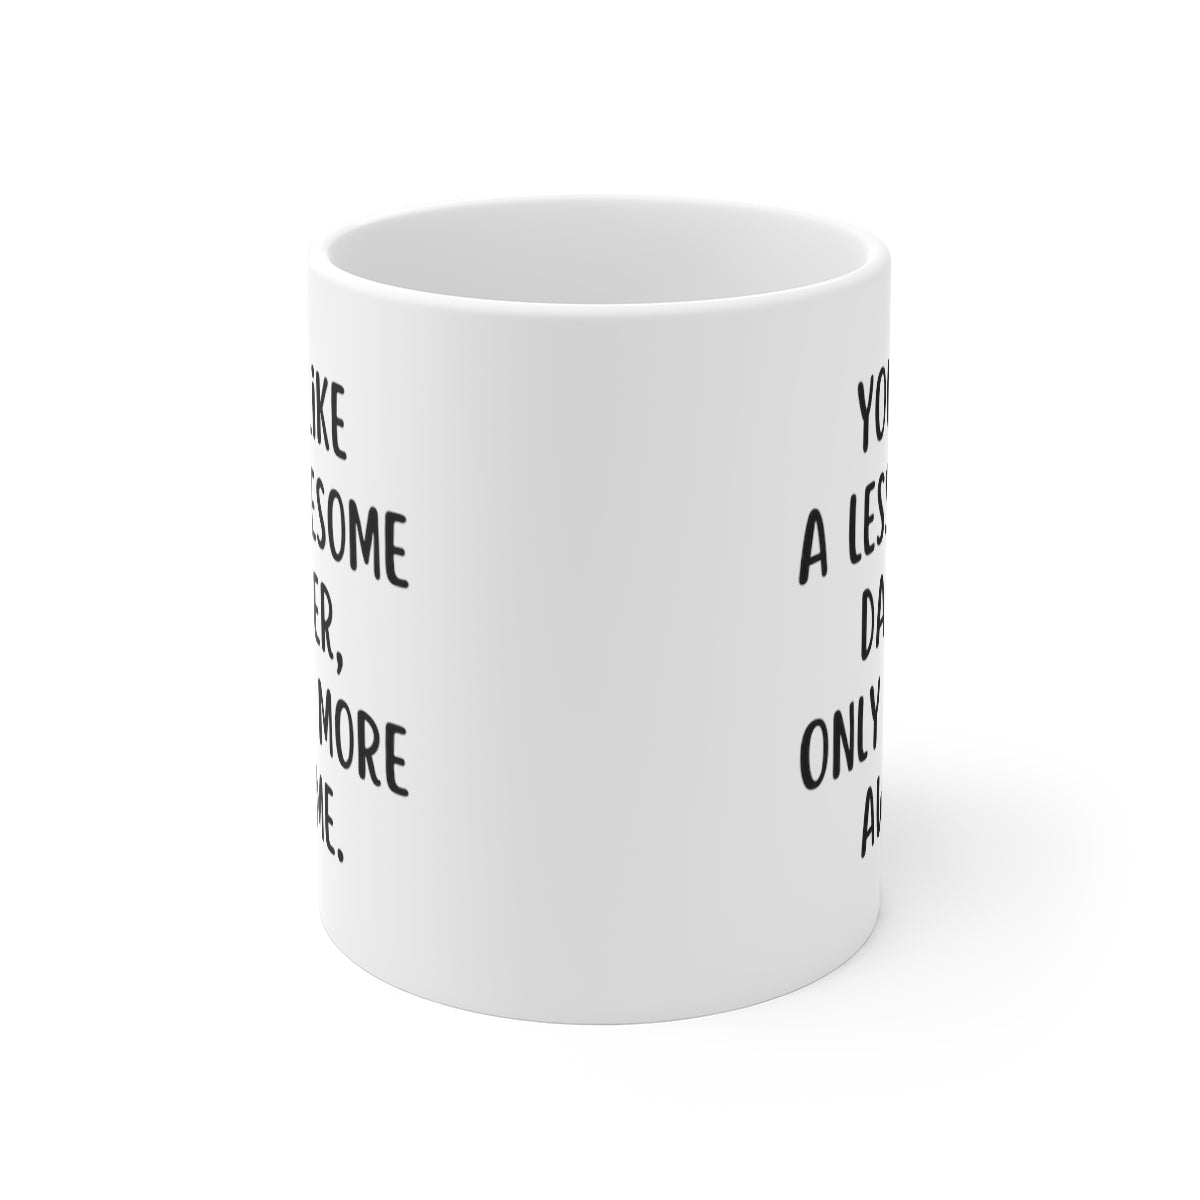 You're Like A Less Awesome Daughter, Only Way More Awesome | Funny, Snarky Gift | White Ceramic Mug, Fun Block Font